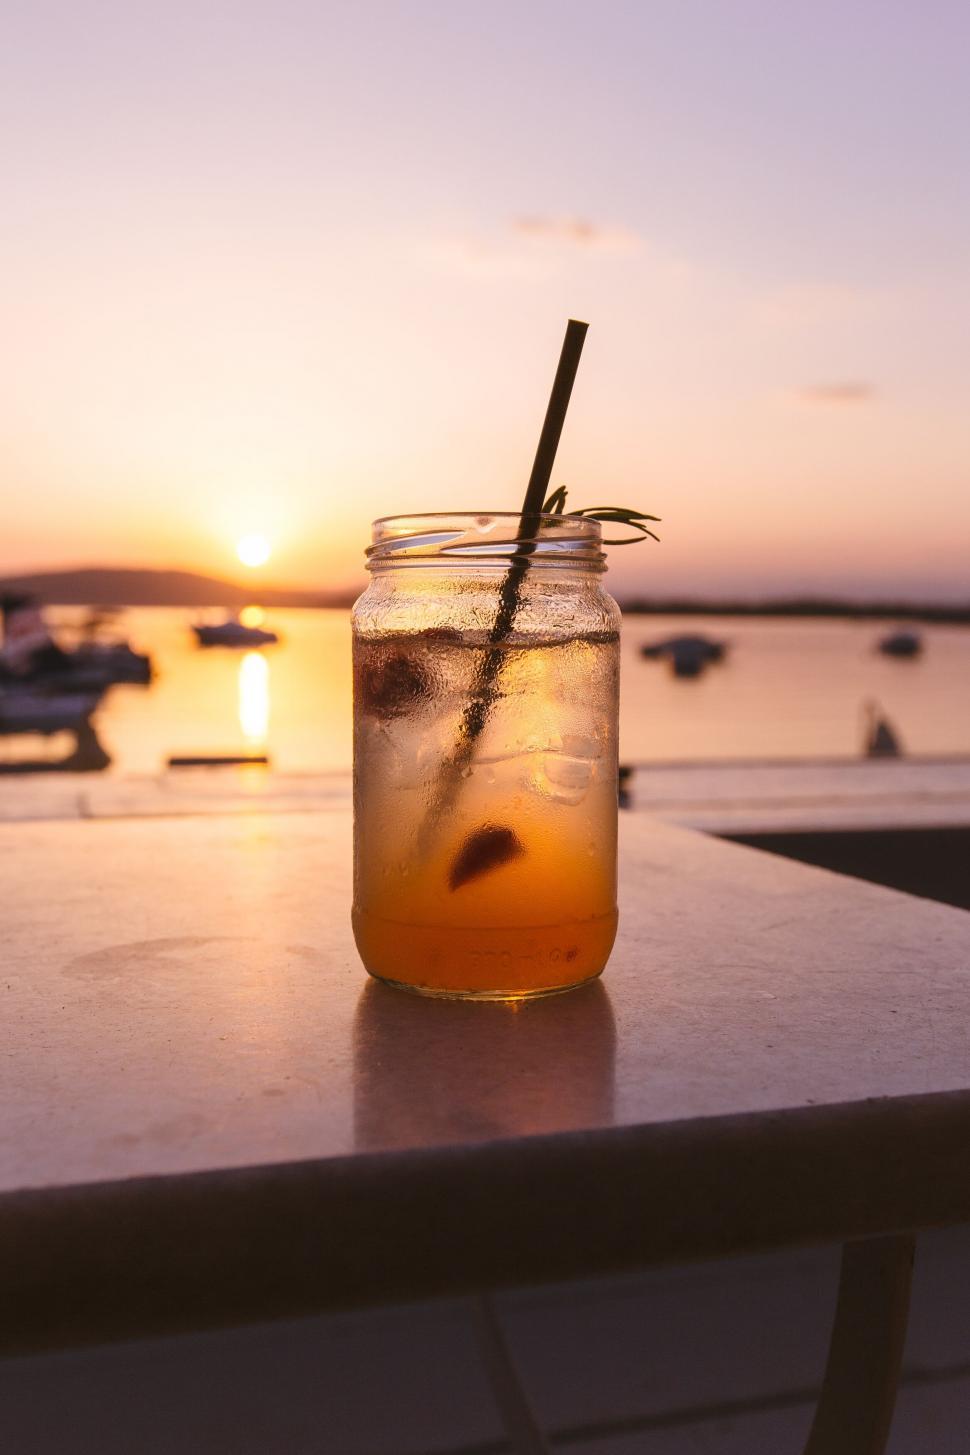 Free Image of Iced drink with sunset and boats backdrop 